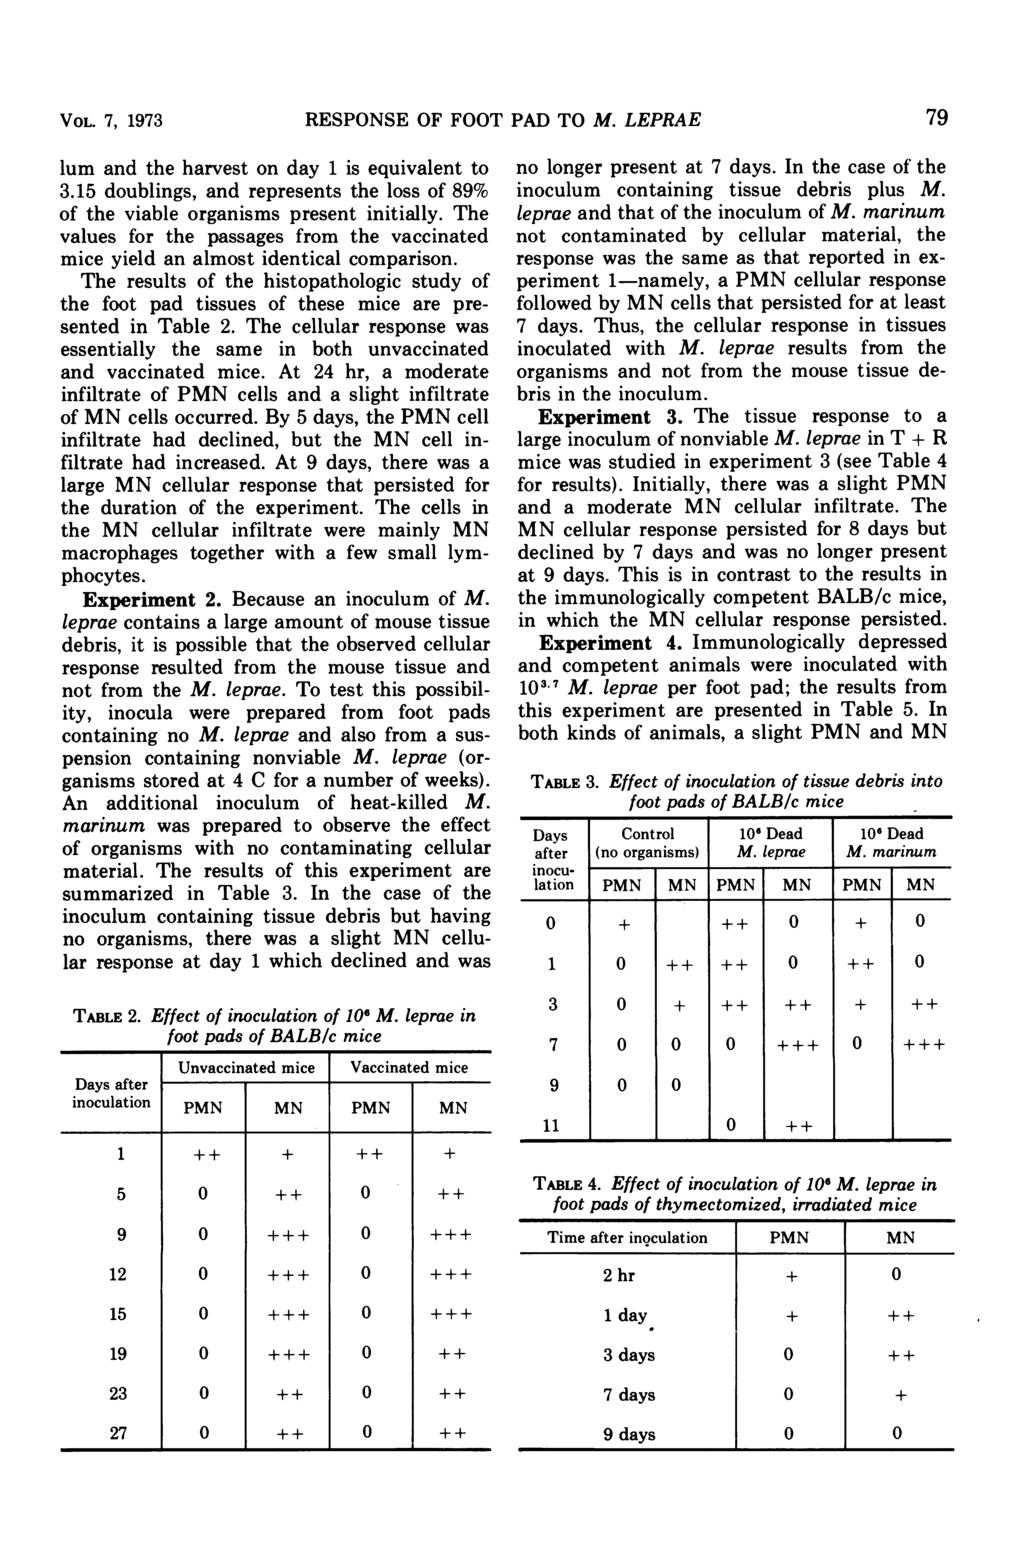 VOL. 7, 1973 lum and the harvest on day 1 is equivalent to 3.15 doublings, and represents the loss of 89% of the viable organisms present initially.